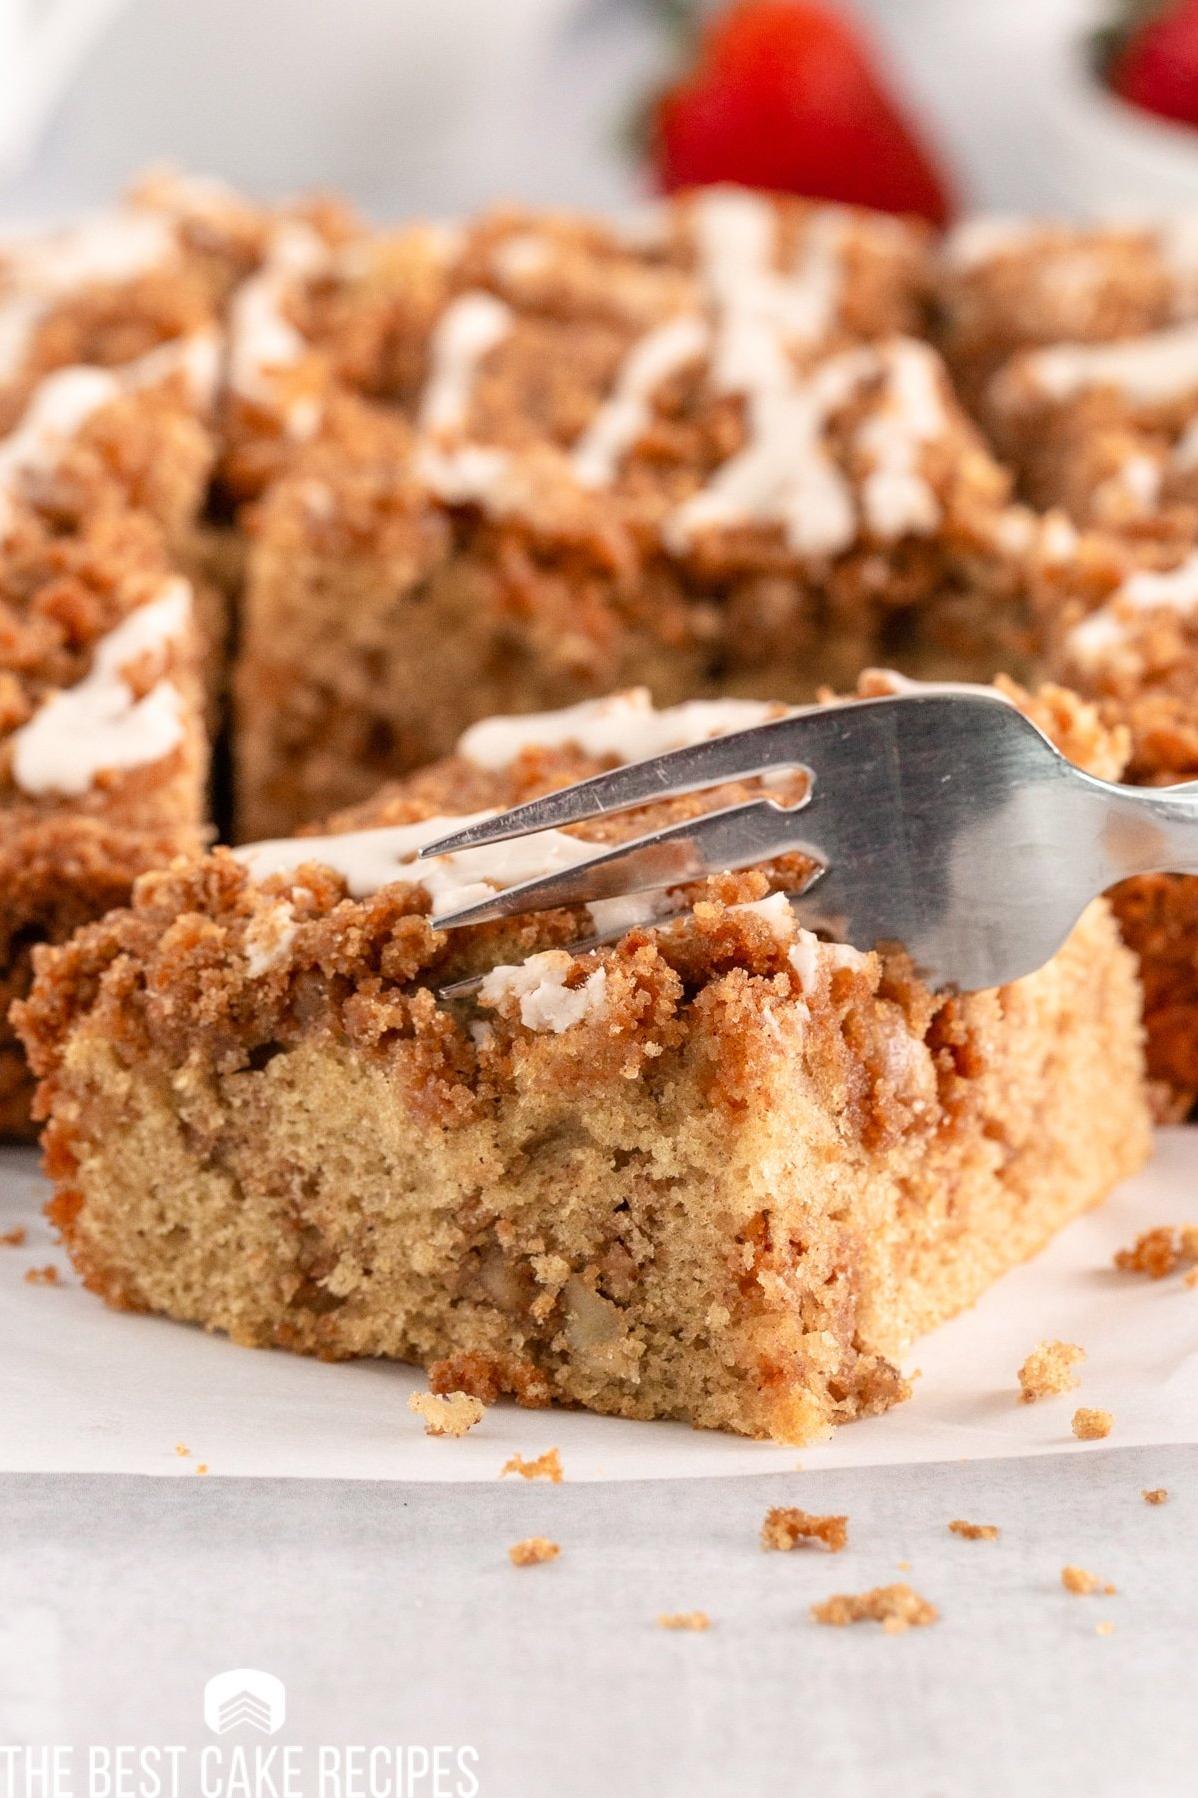  Who needs a plain coffee cake when you can have one loaded with chocolate and graham cracker goodness?